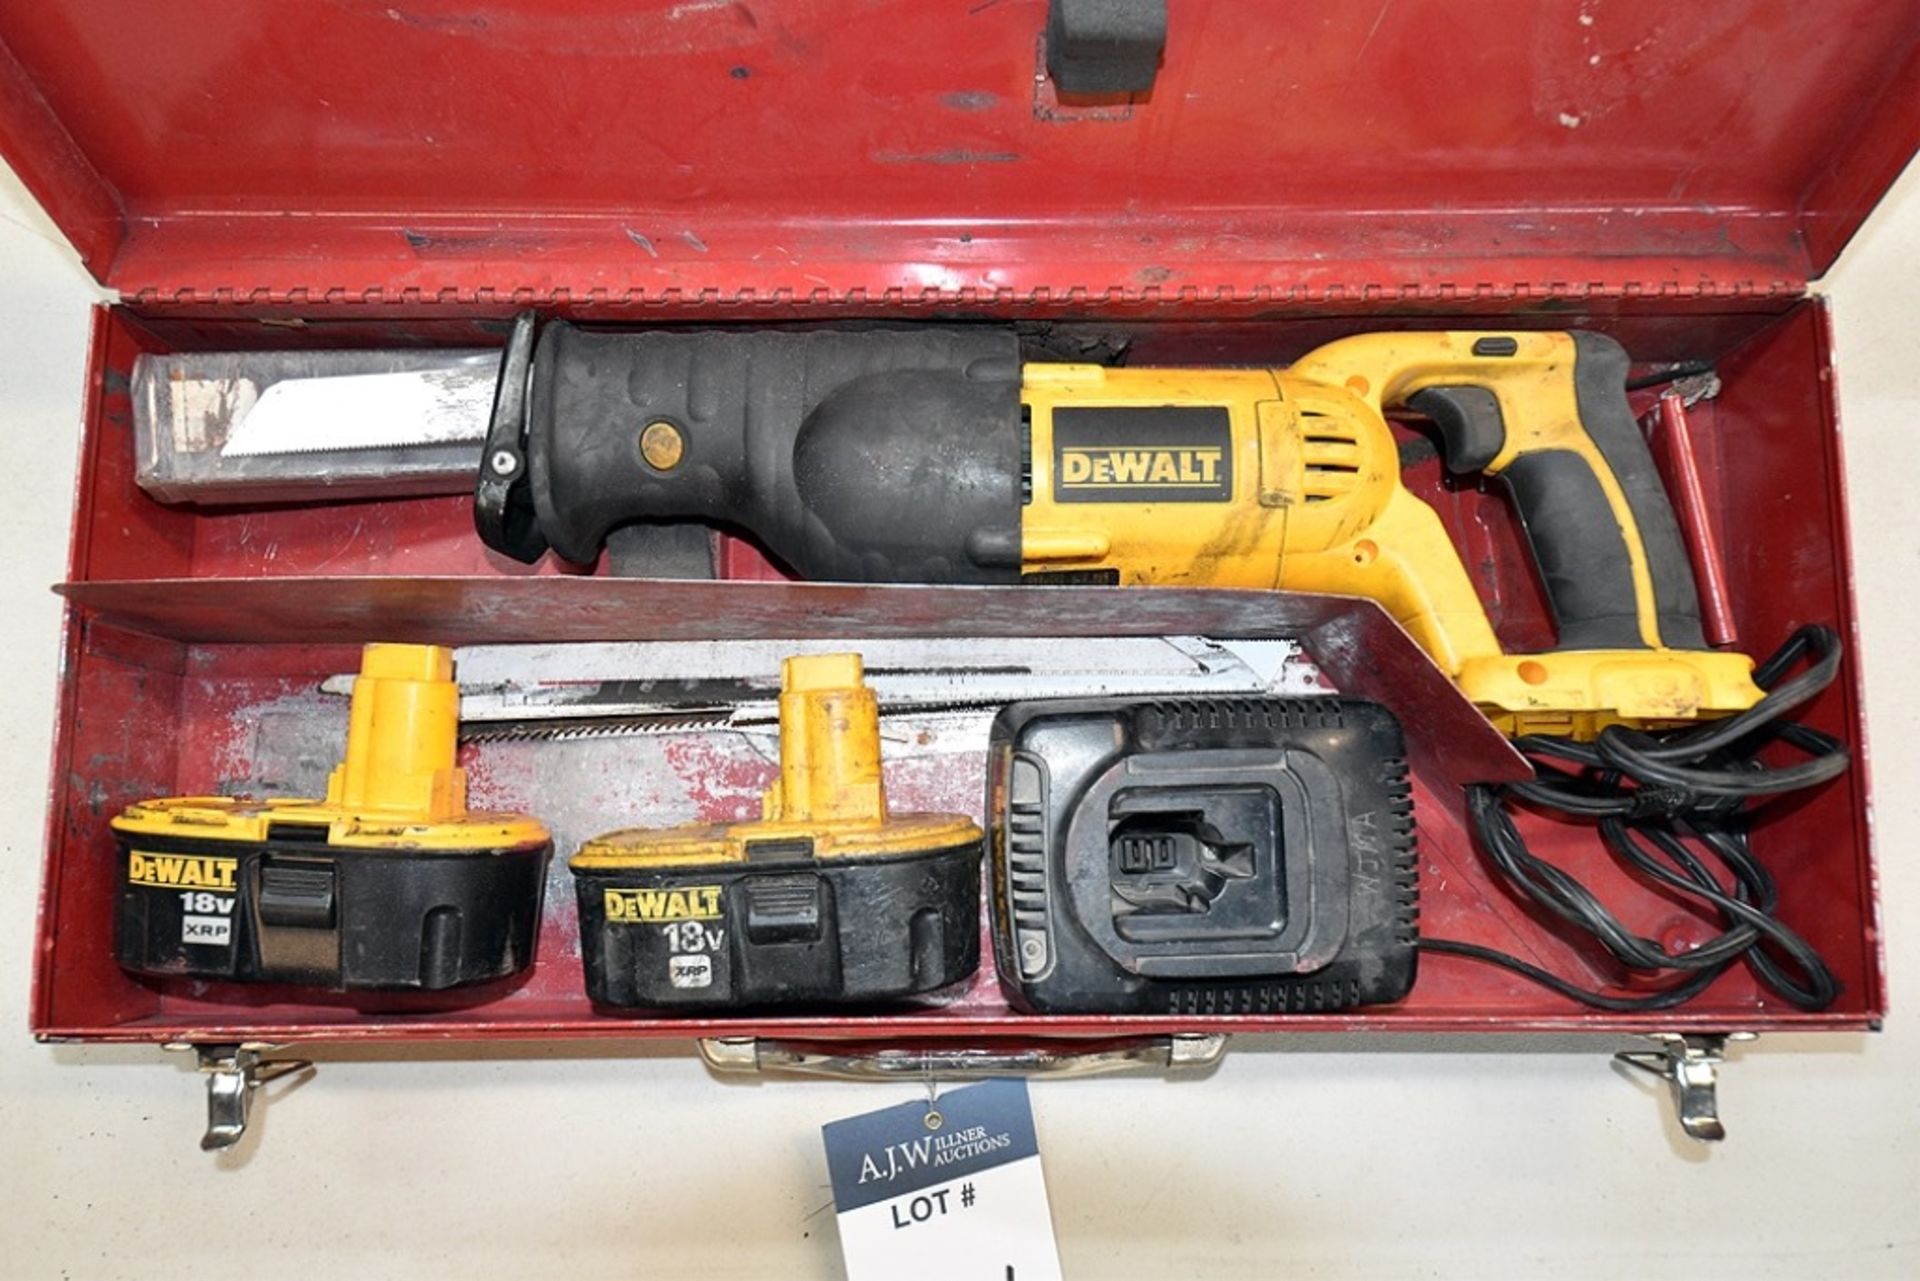 DeWalt DC385 Variable Speed Reciprocating Saw 18v w/ (2) Batteries, (1) Charger, and (1) Milwaukee C